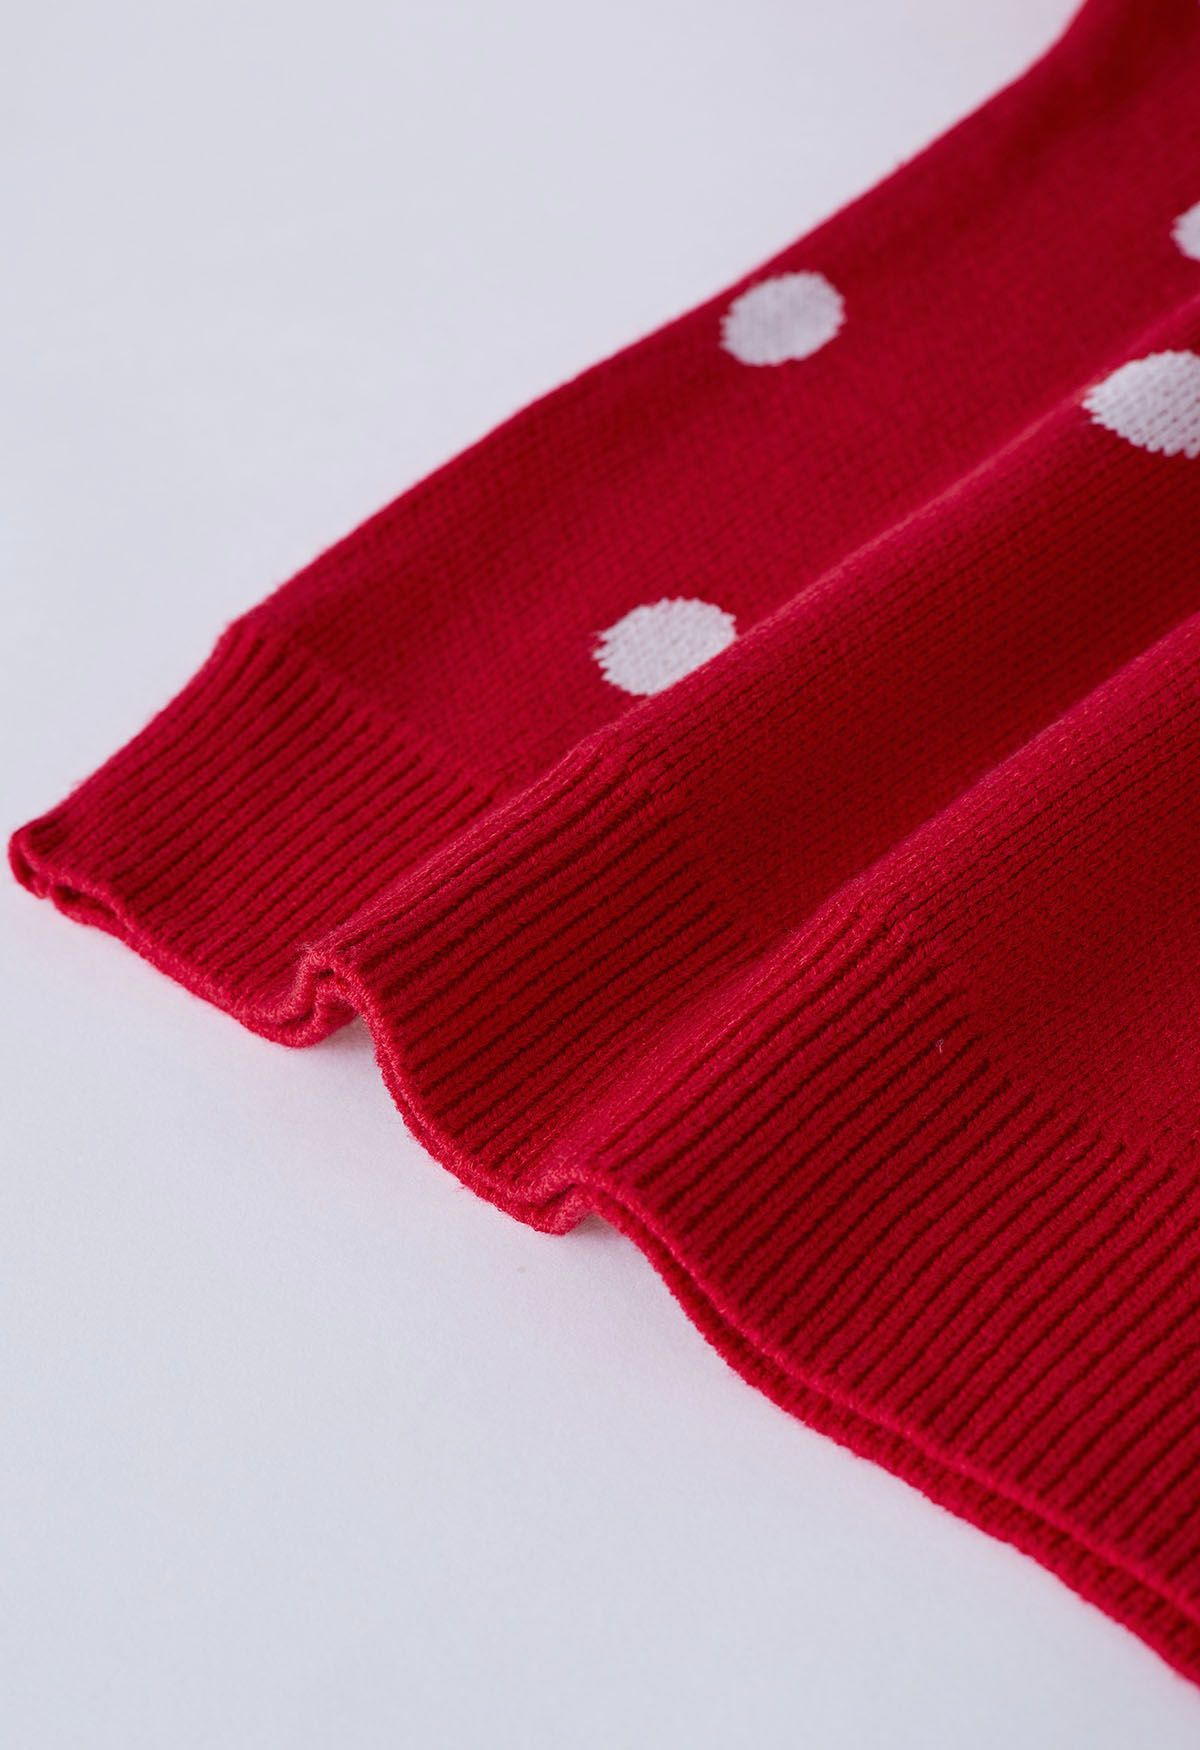 Adorable Polka Dot Mock Neck Knit Sweater in Red